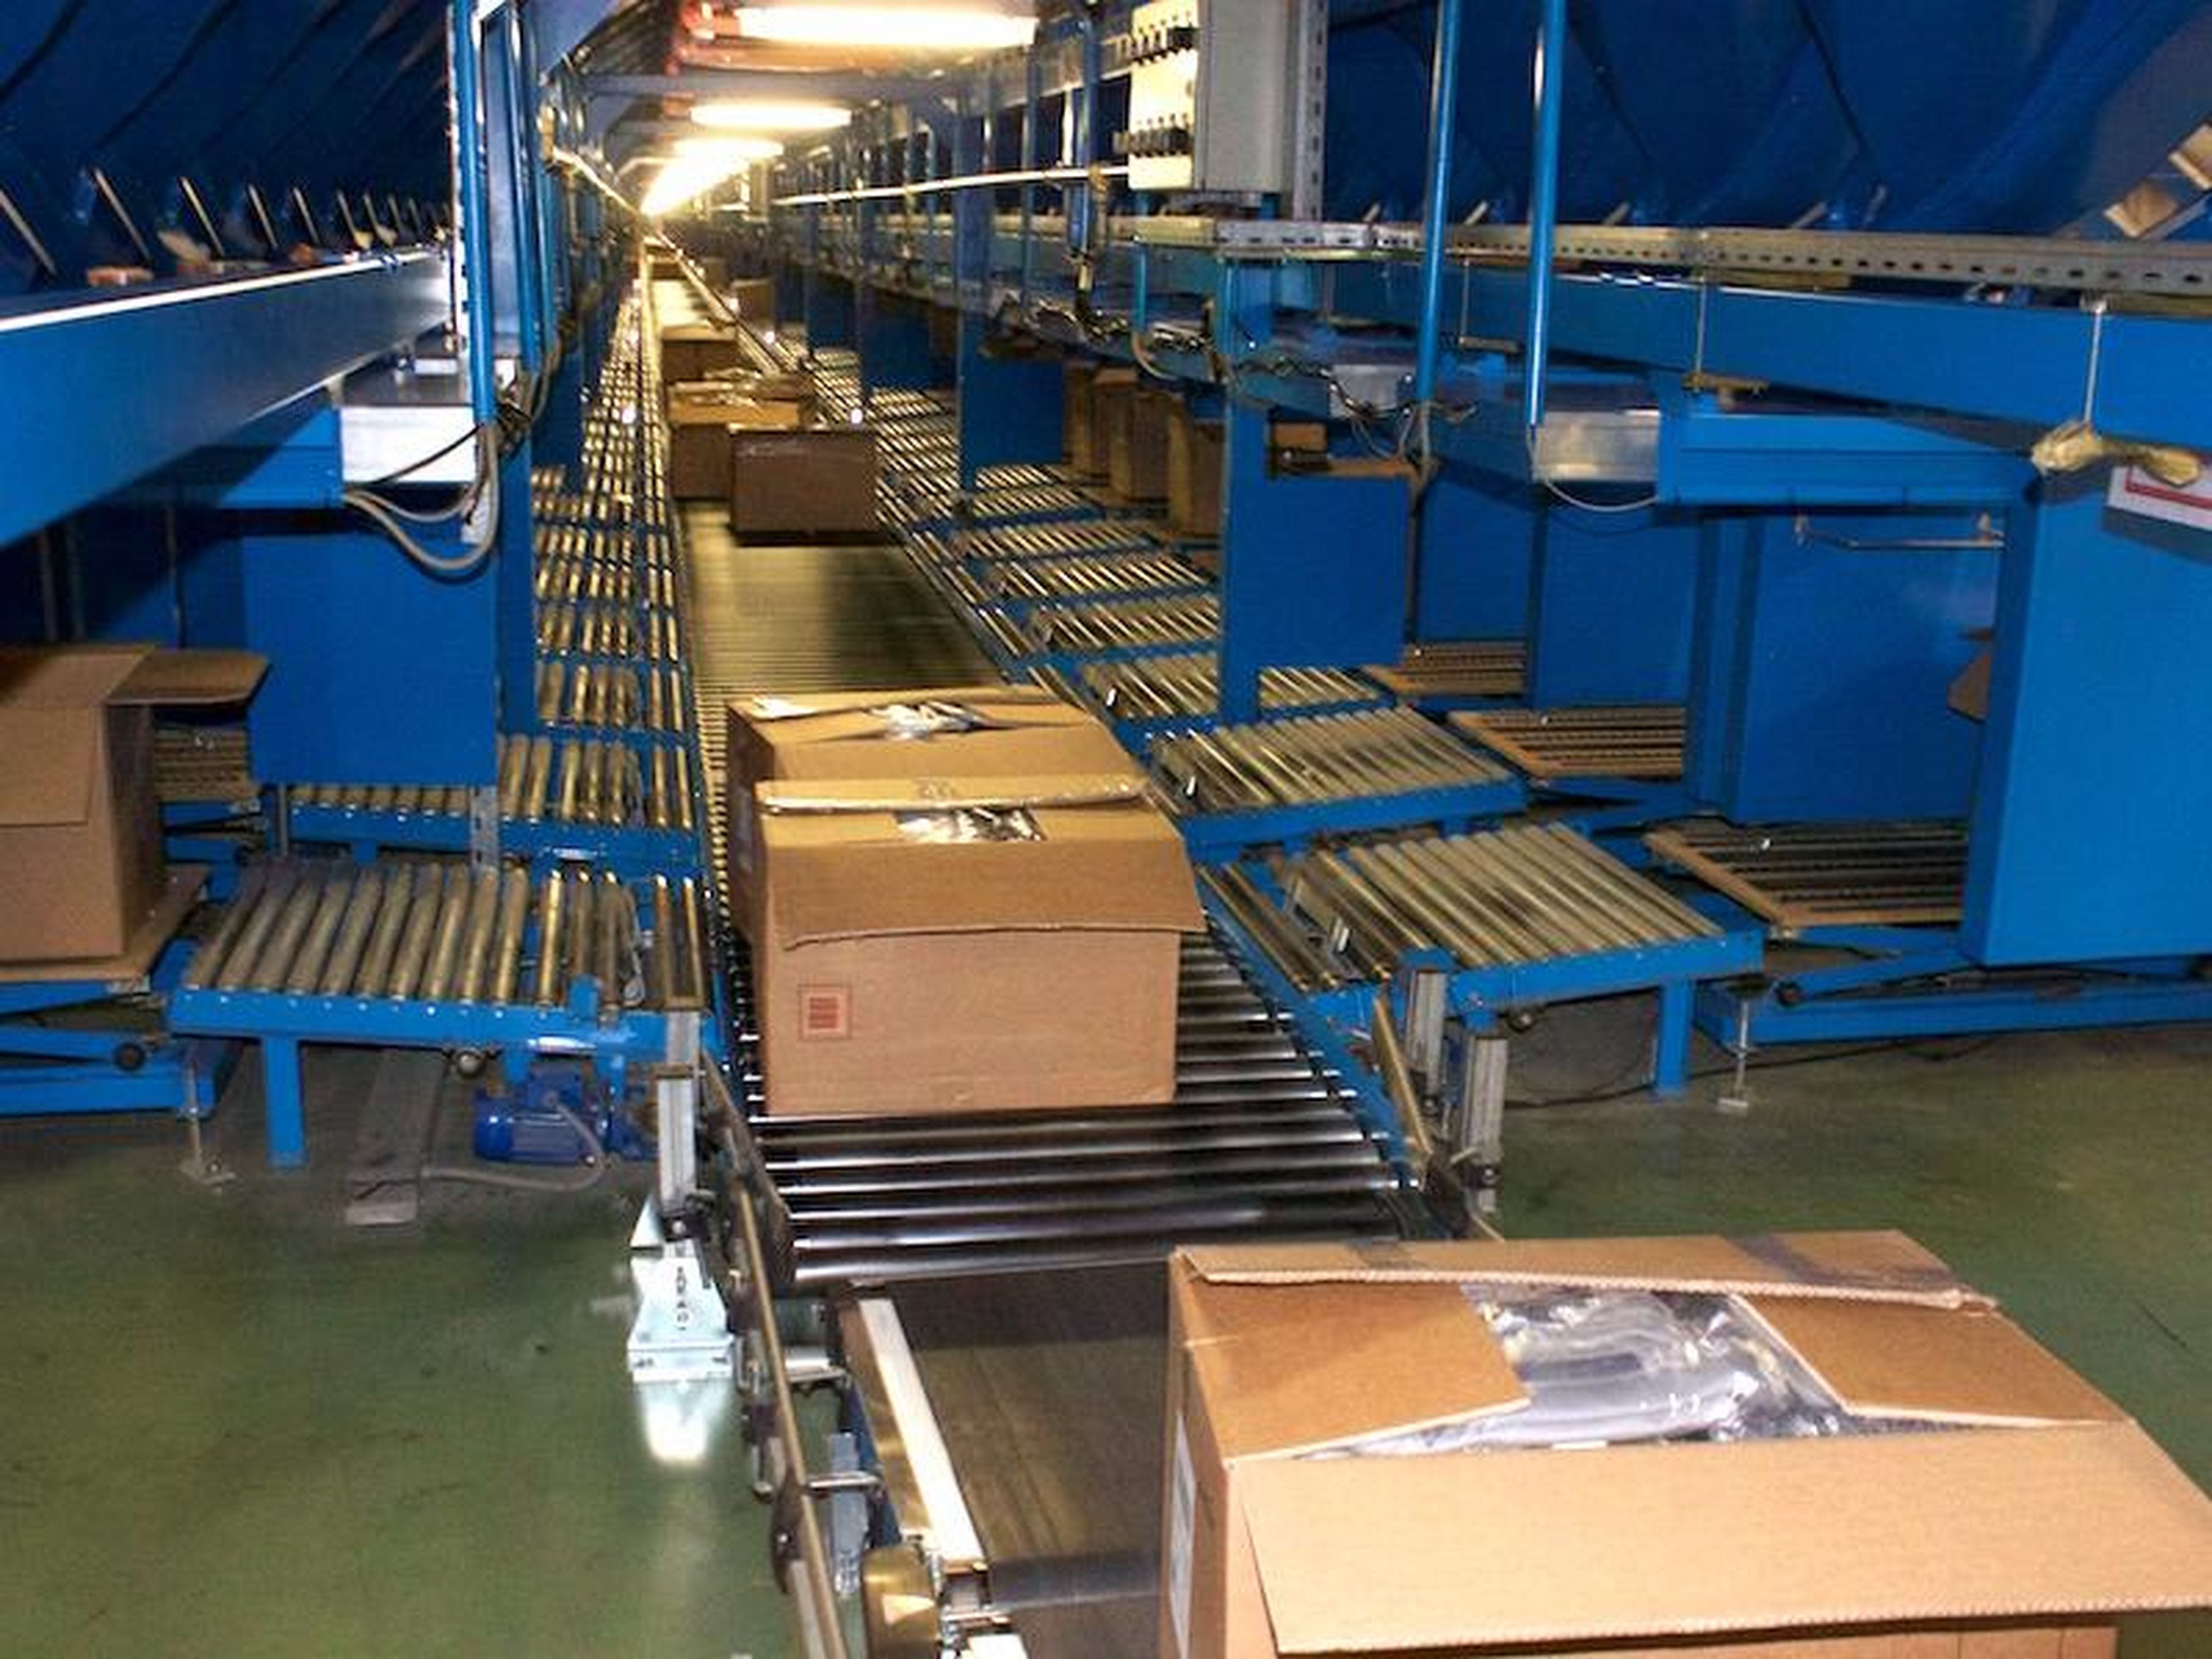 The full boxes are then placed on another conveyer belt to be sent out for delivery.